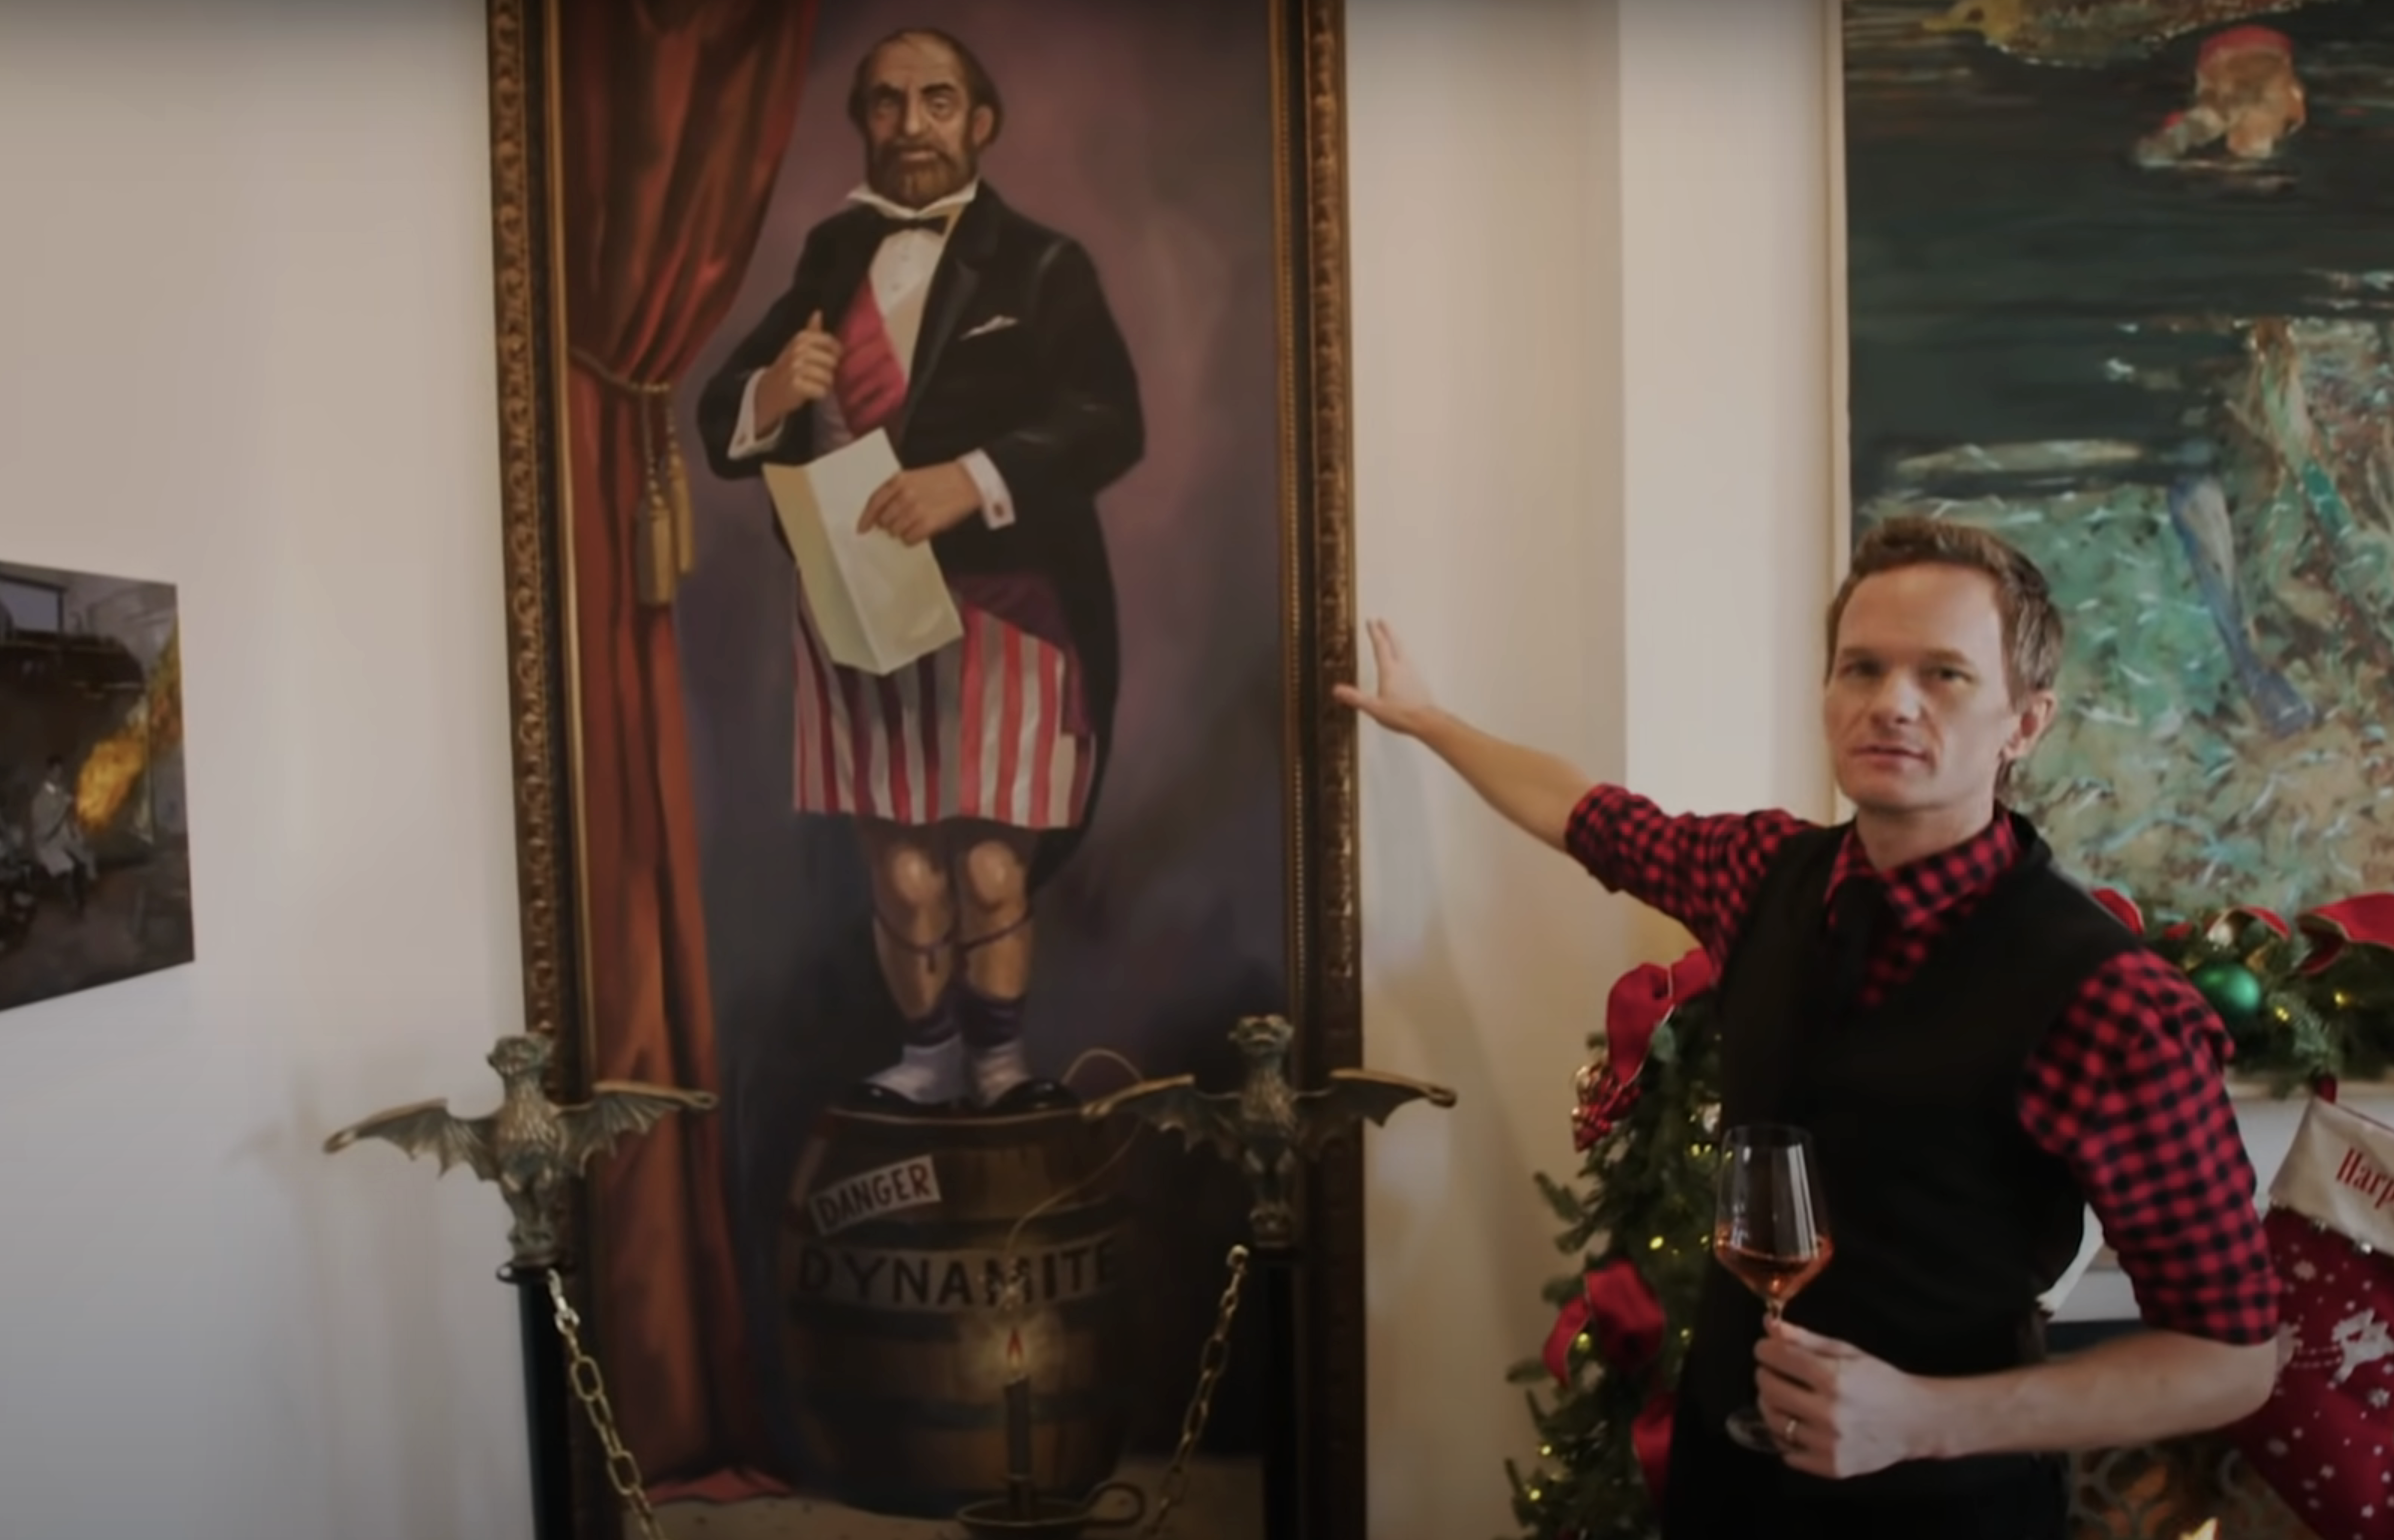 Neil Patrick Harris in his home with a painting from the Haunted Mansion ride at Disney World